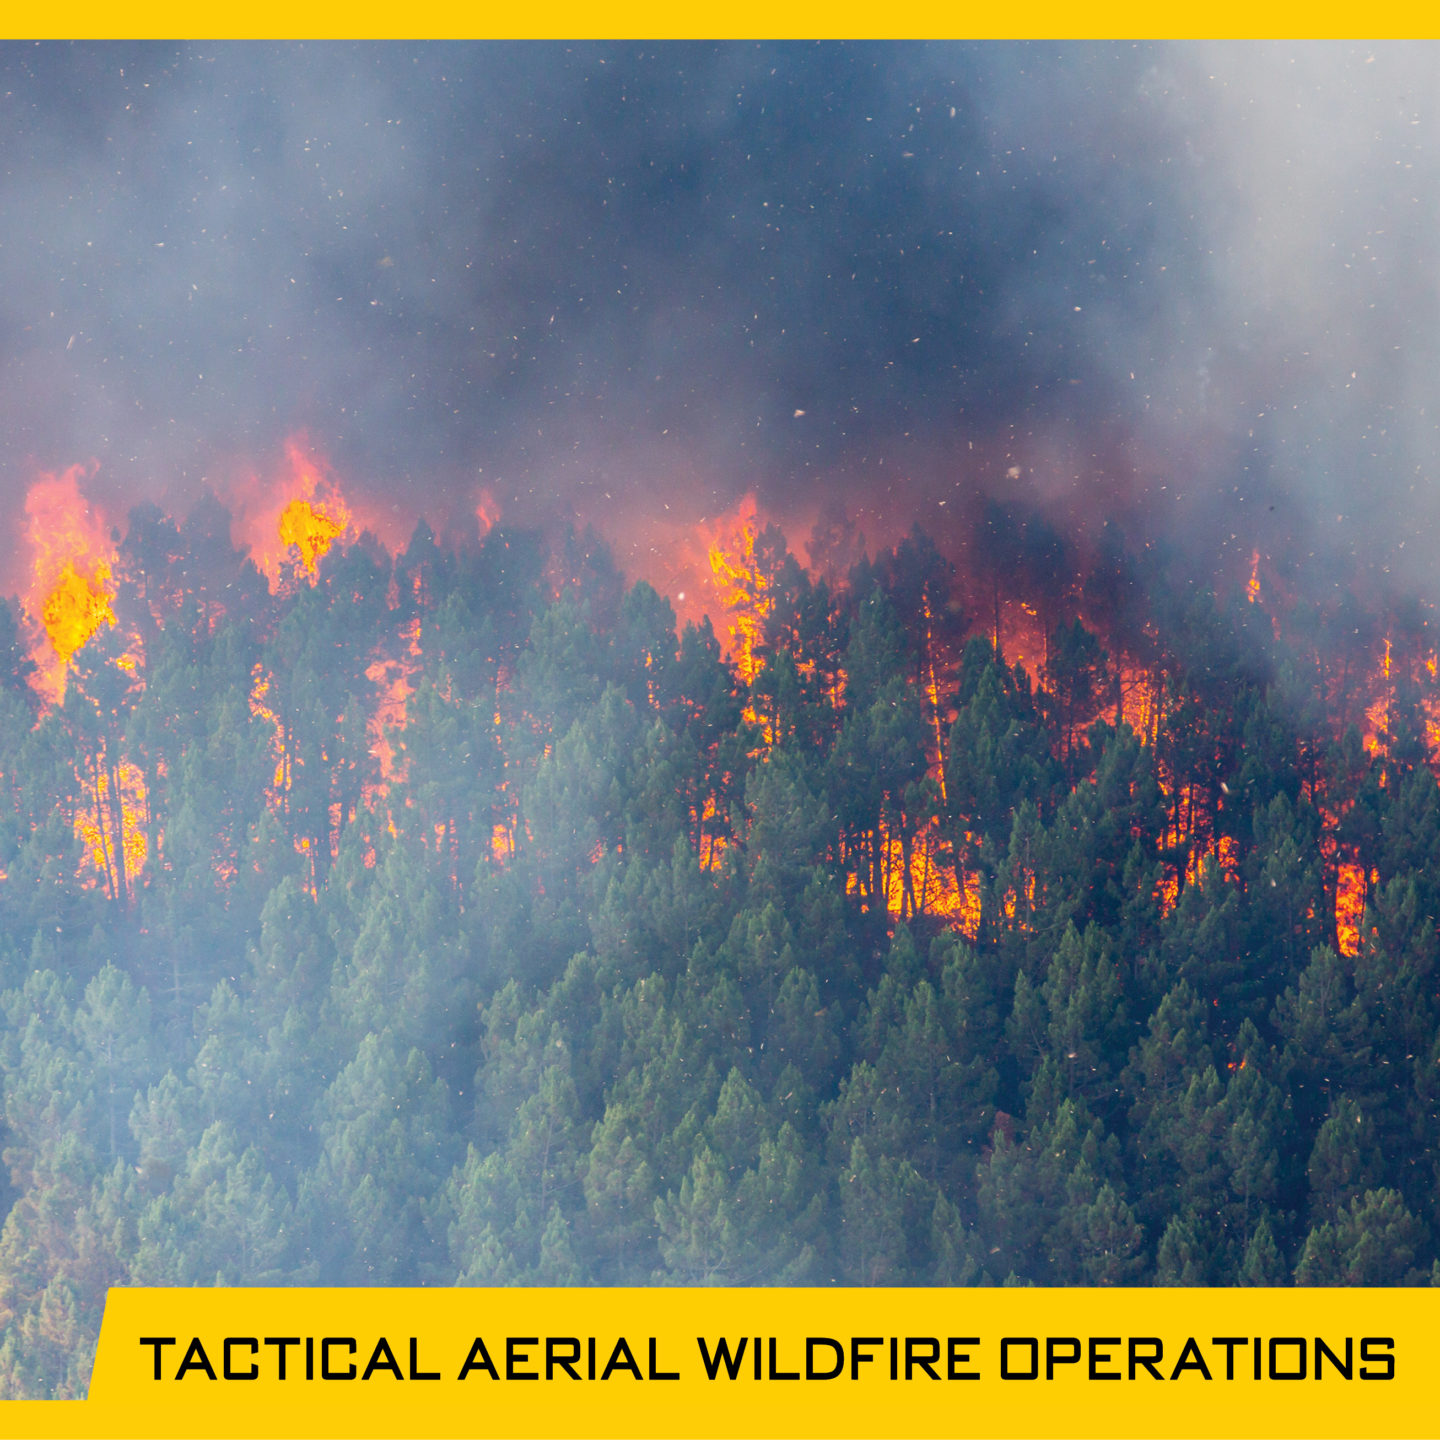 Aerial firefighting technologies like fire mapping and airspace management to combat destructive Canadian wildfires.